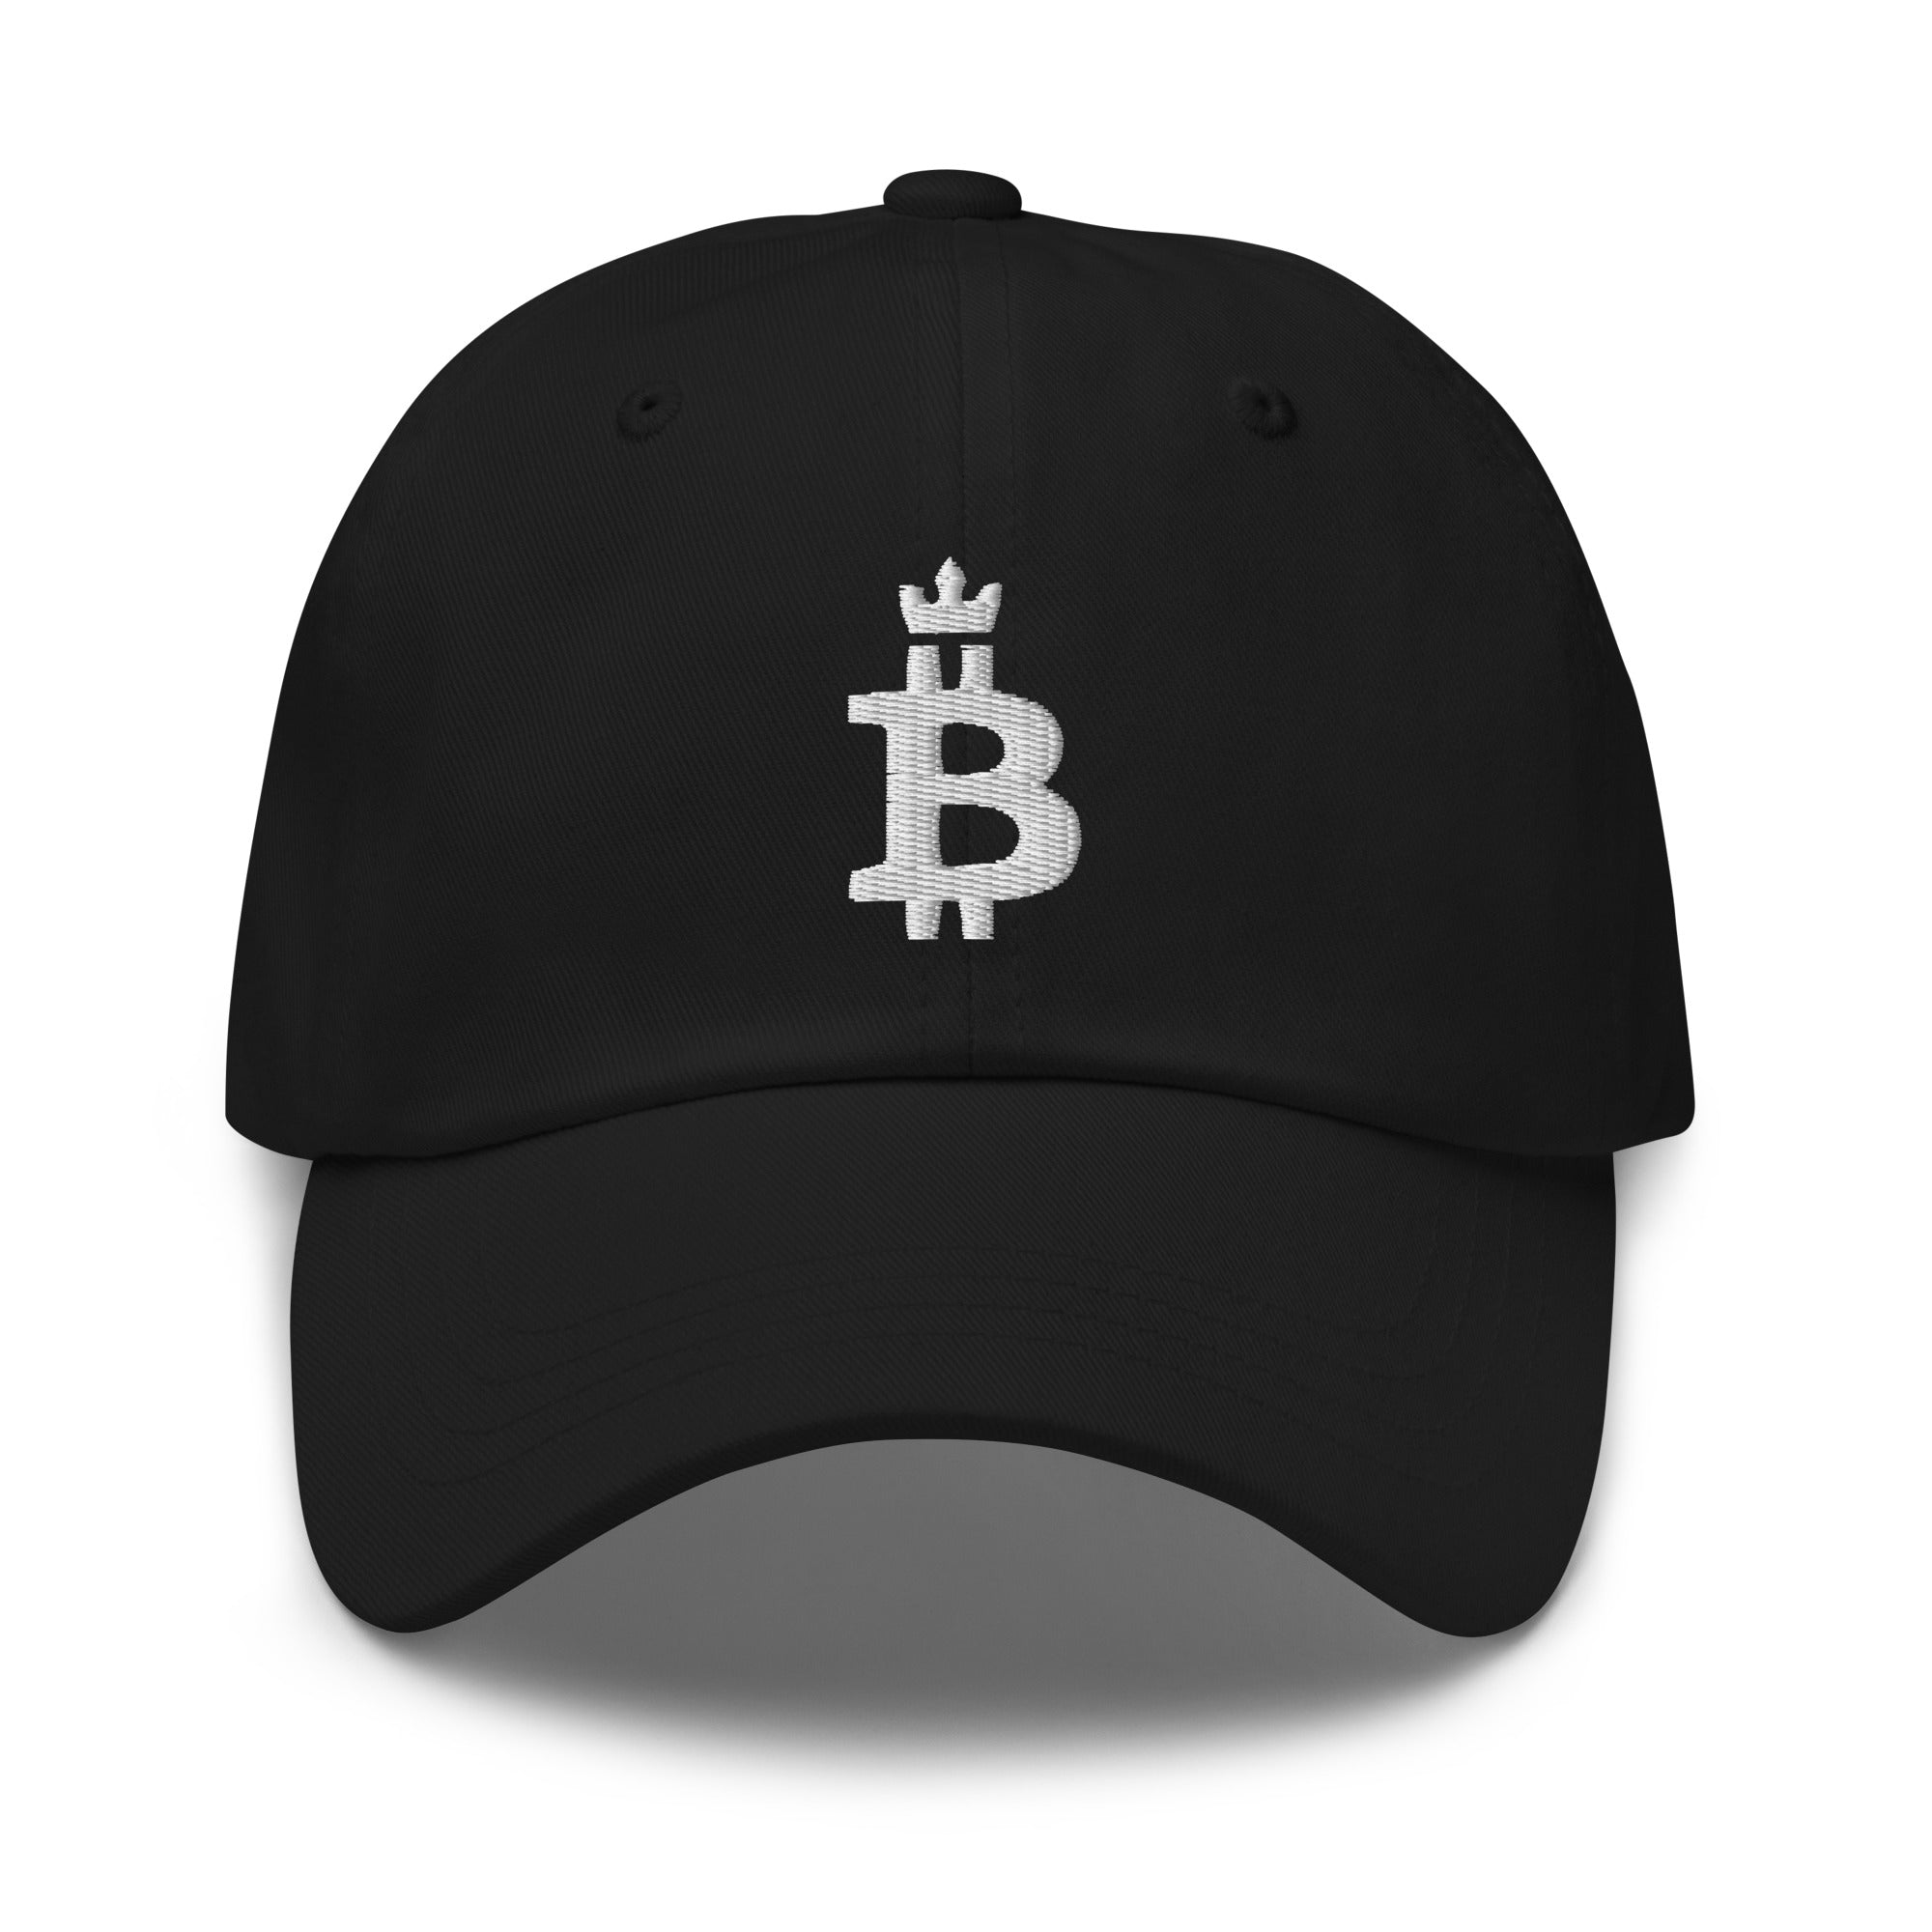 Bitcoin Hat - This Bitcoin Dominance Hat features an embroidered Bitcoin design on the front of a black cap. Front view.